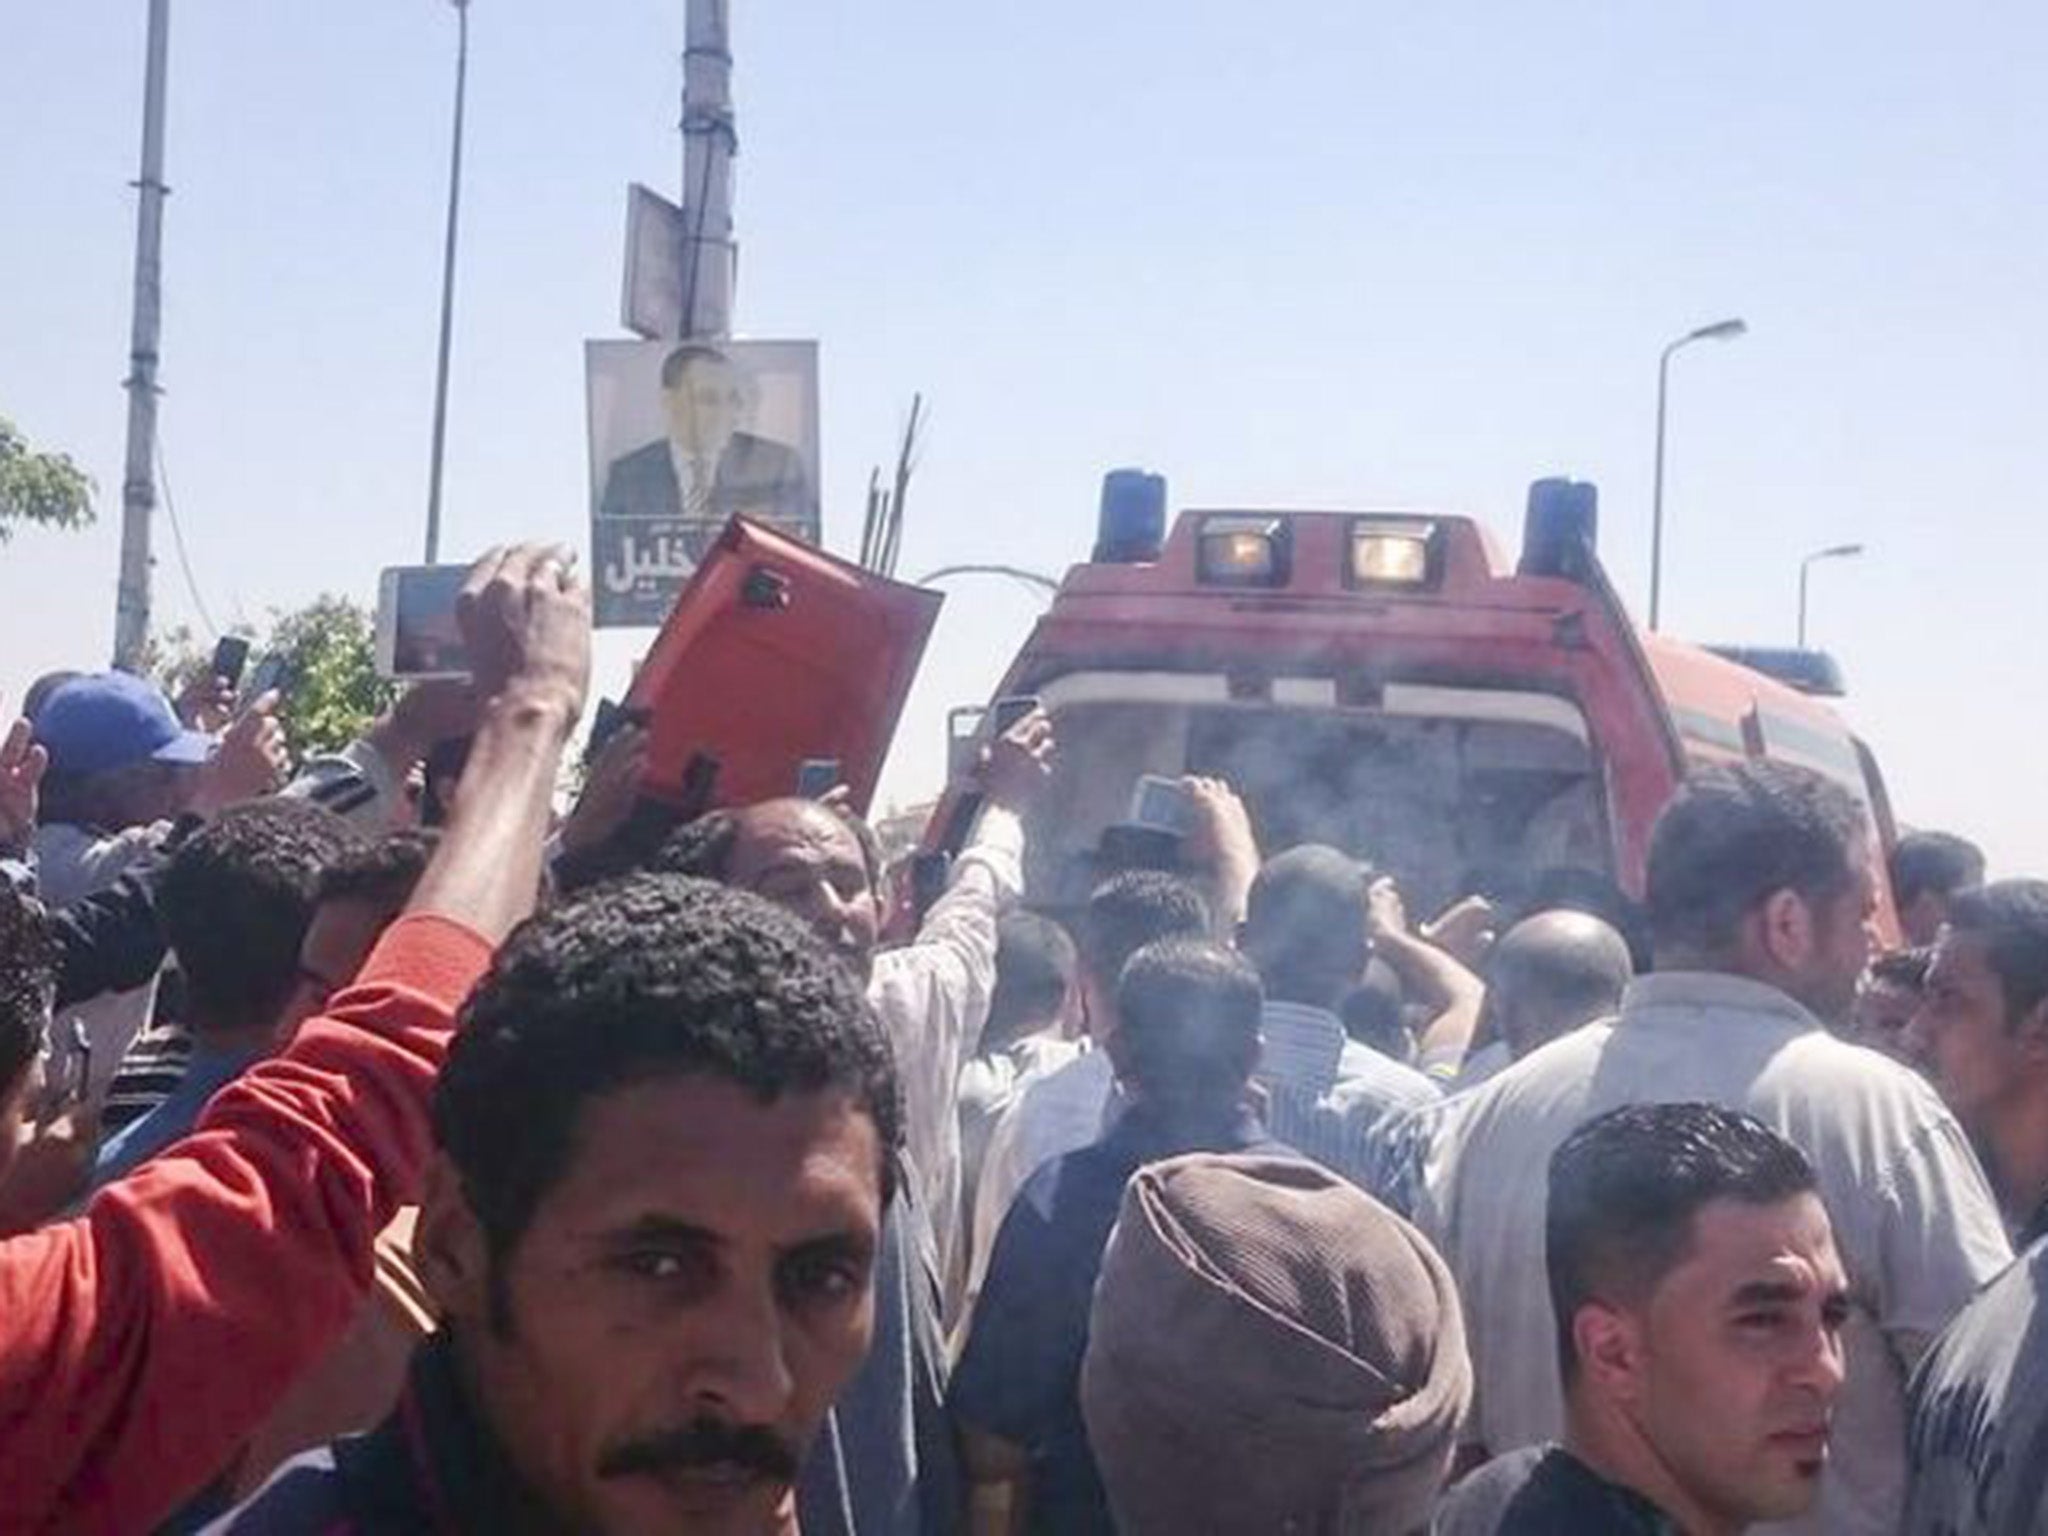 Riots spilled out onto the streets of Cairo after police shot the vendor dead